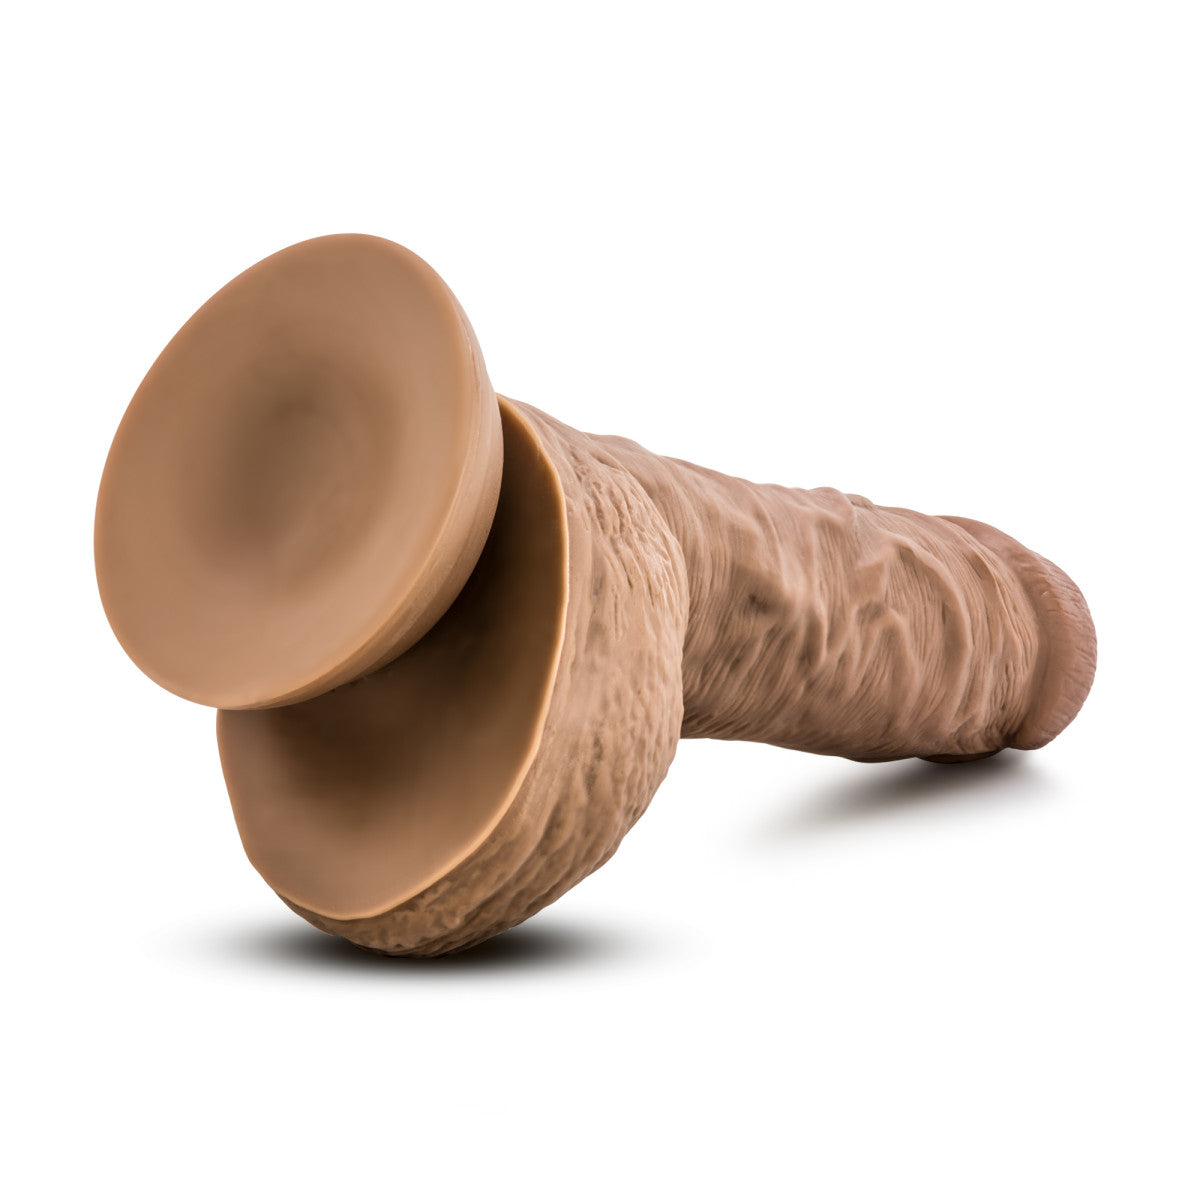 Au Naturel Big Billy Realistic Mocha 9-Inch Long Dildo With Balls & Suction Cup Base